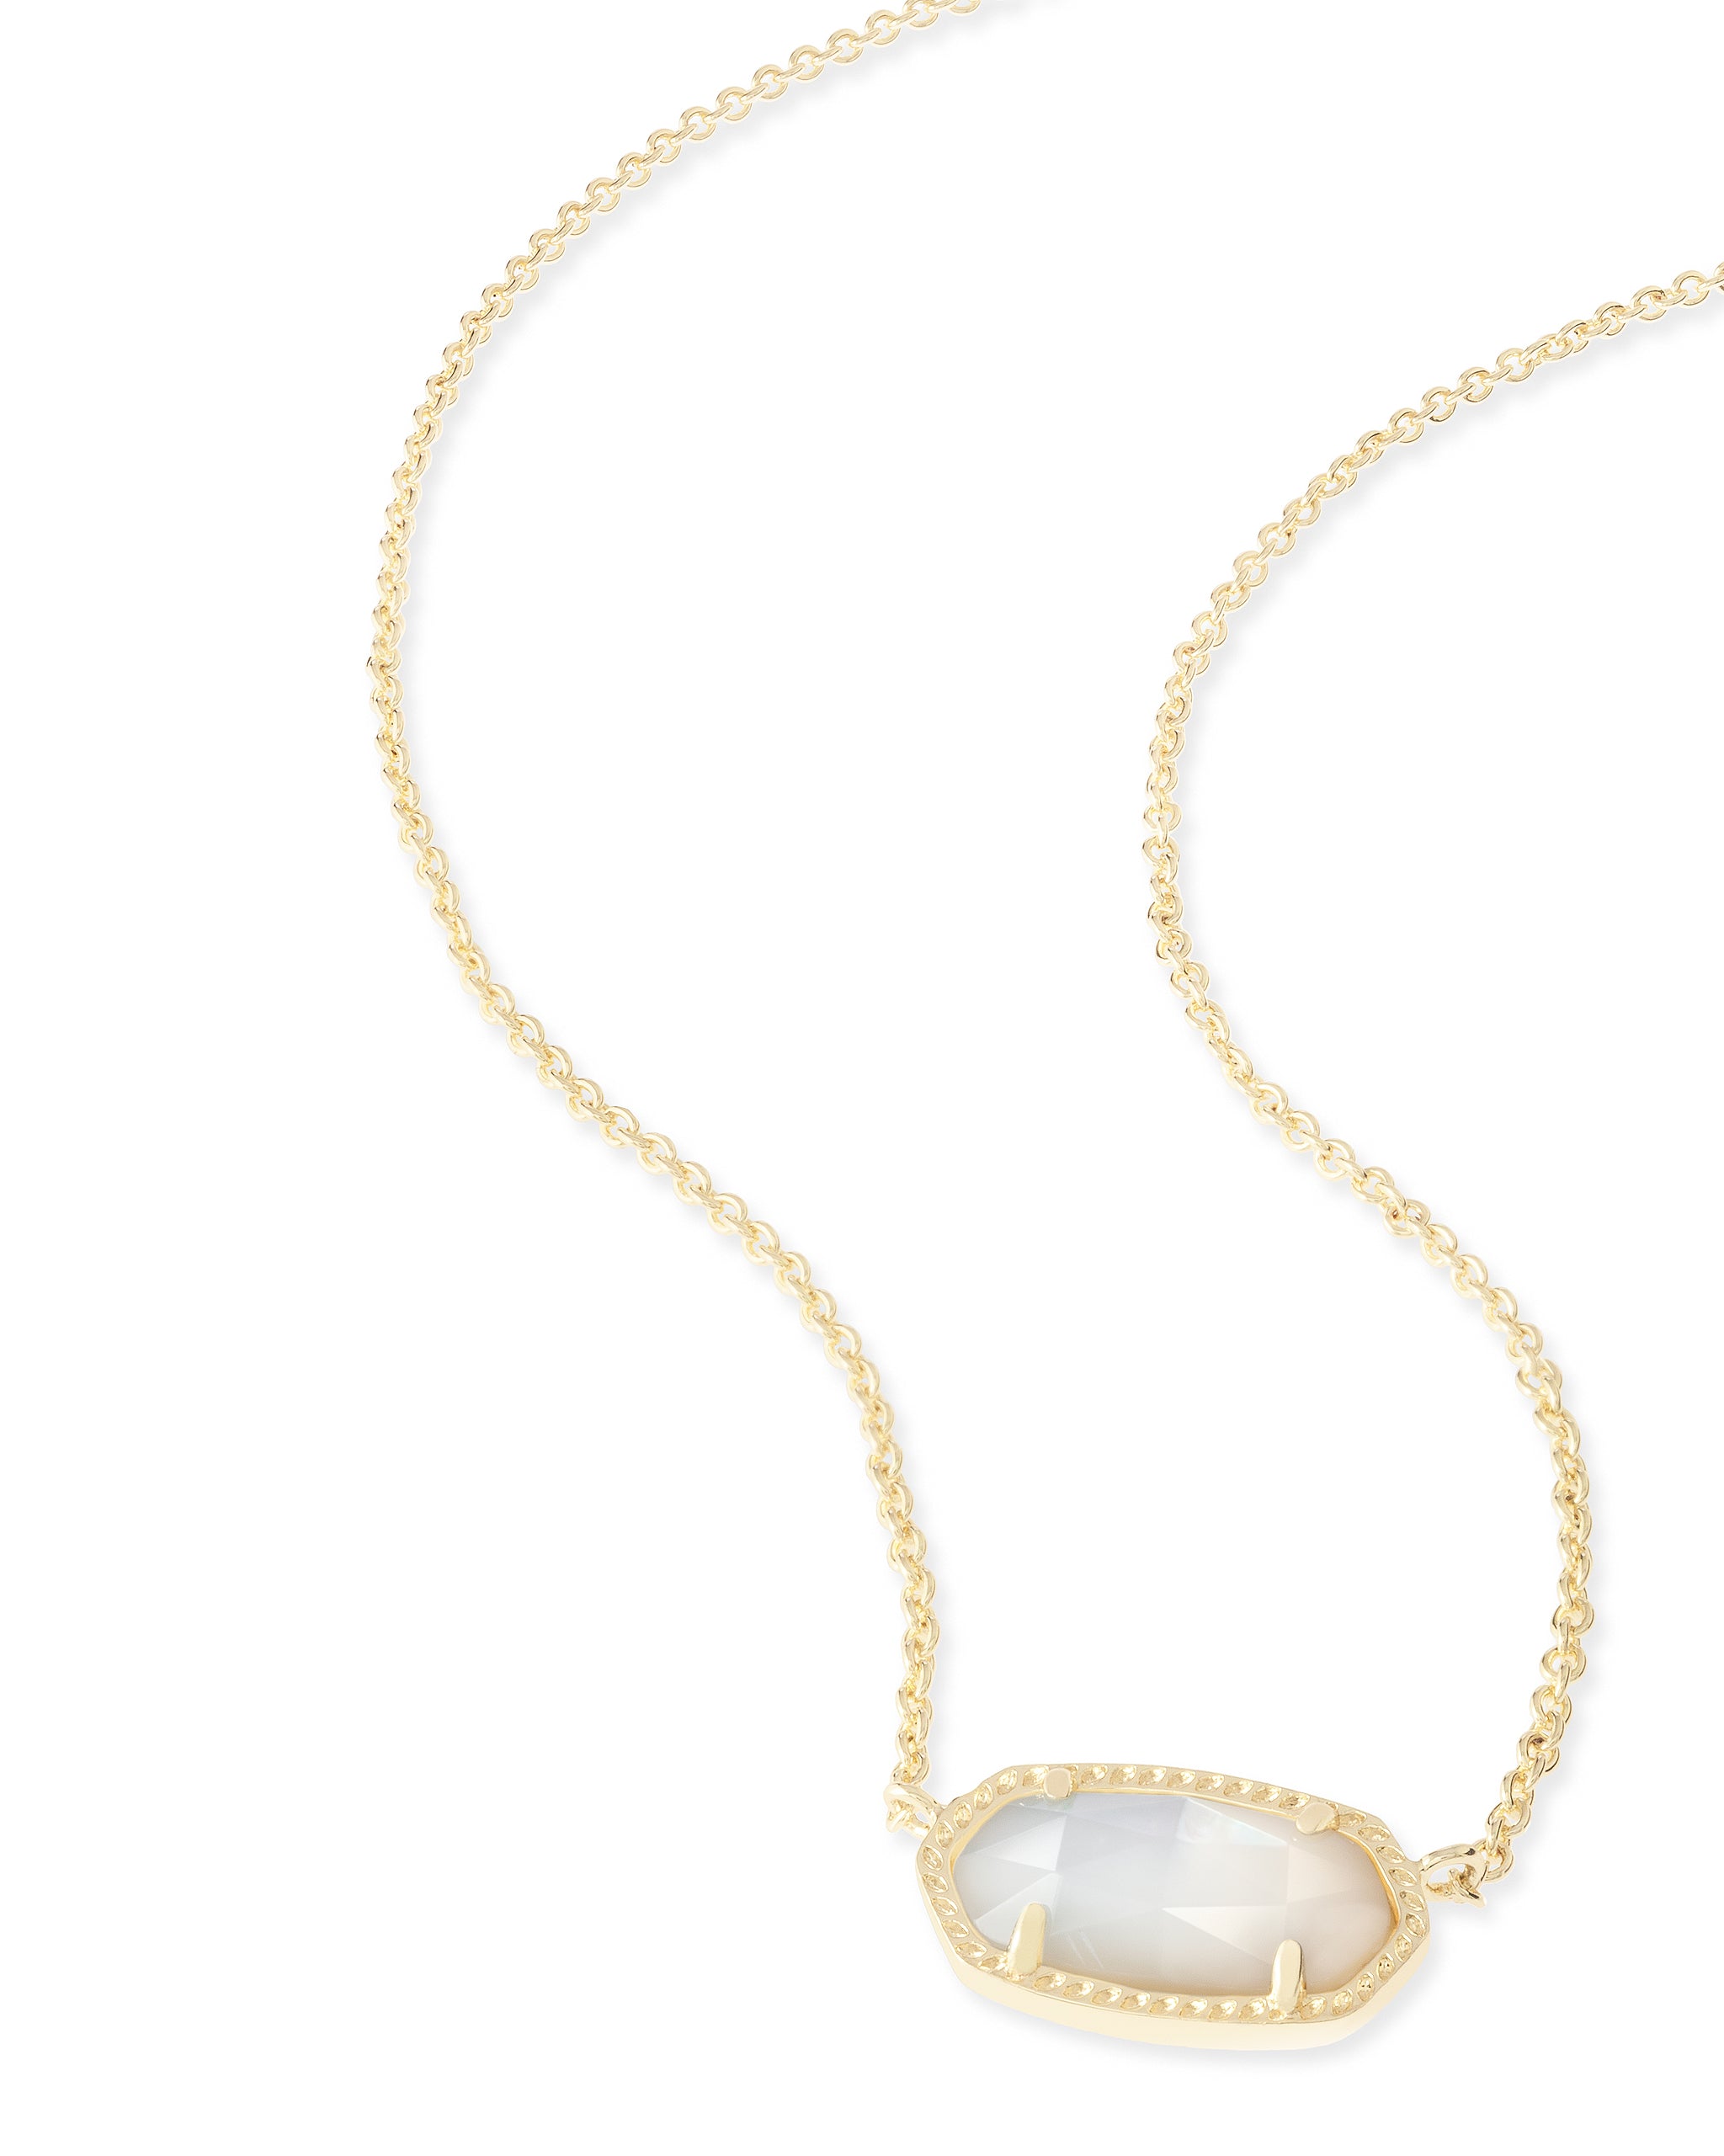 Kendra Scott Elisa Oval Pendant Necklace in Ivory Pearl and Gold